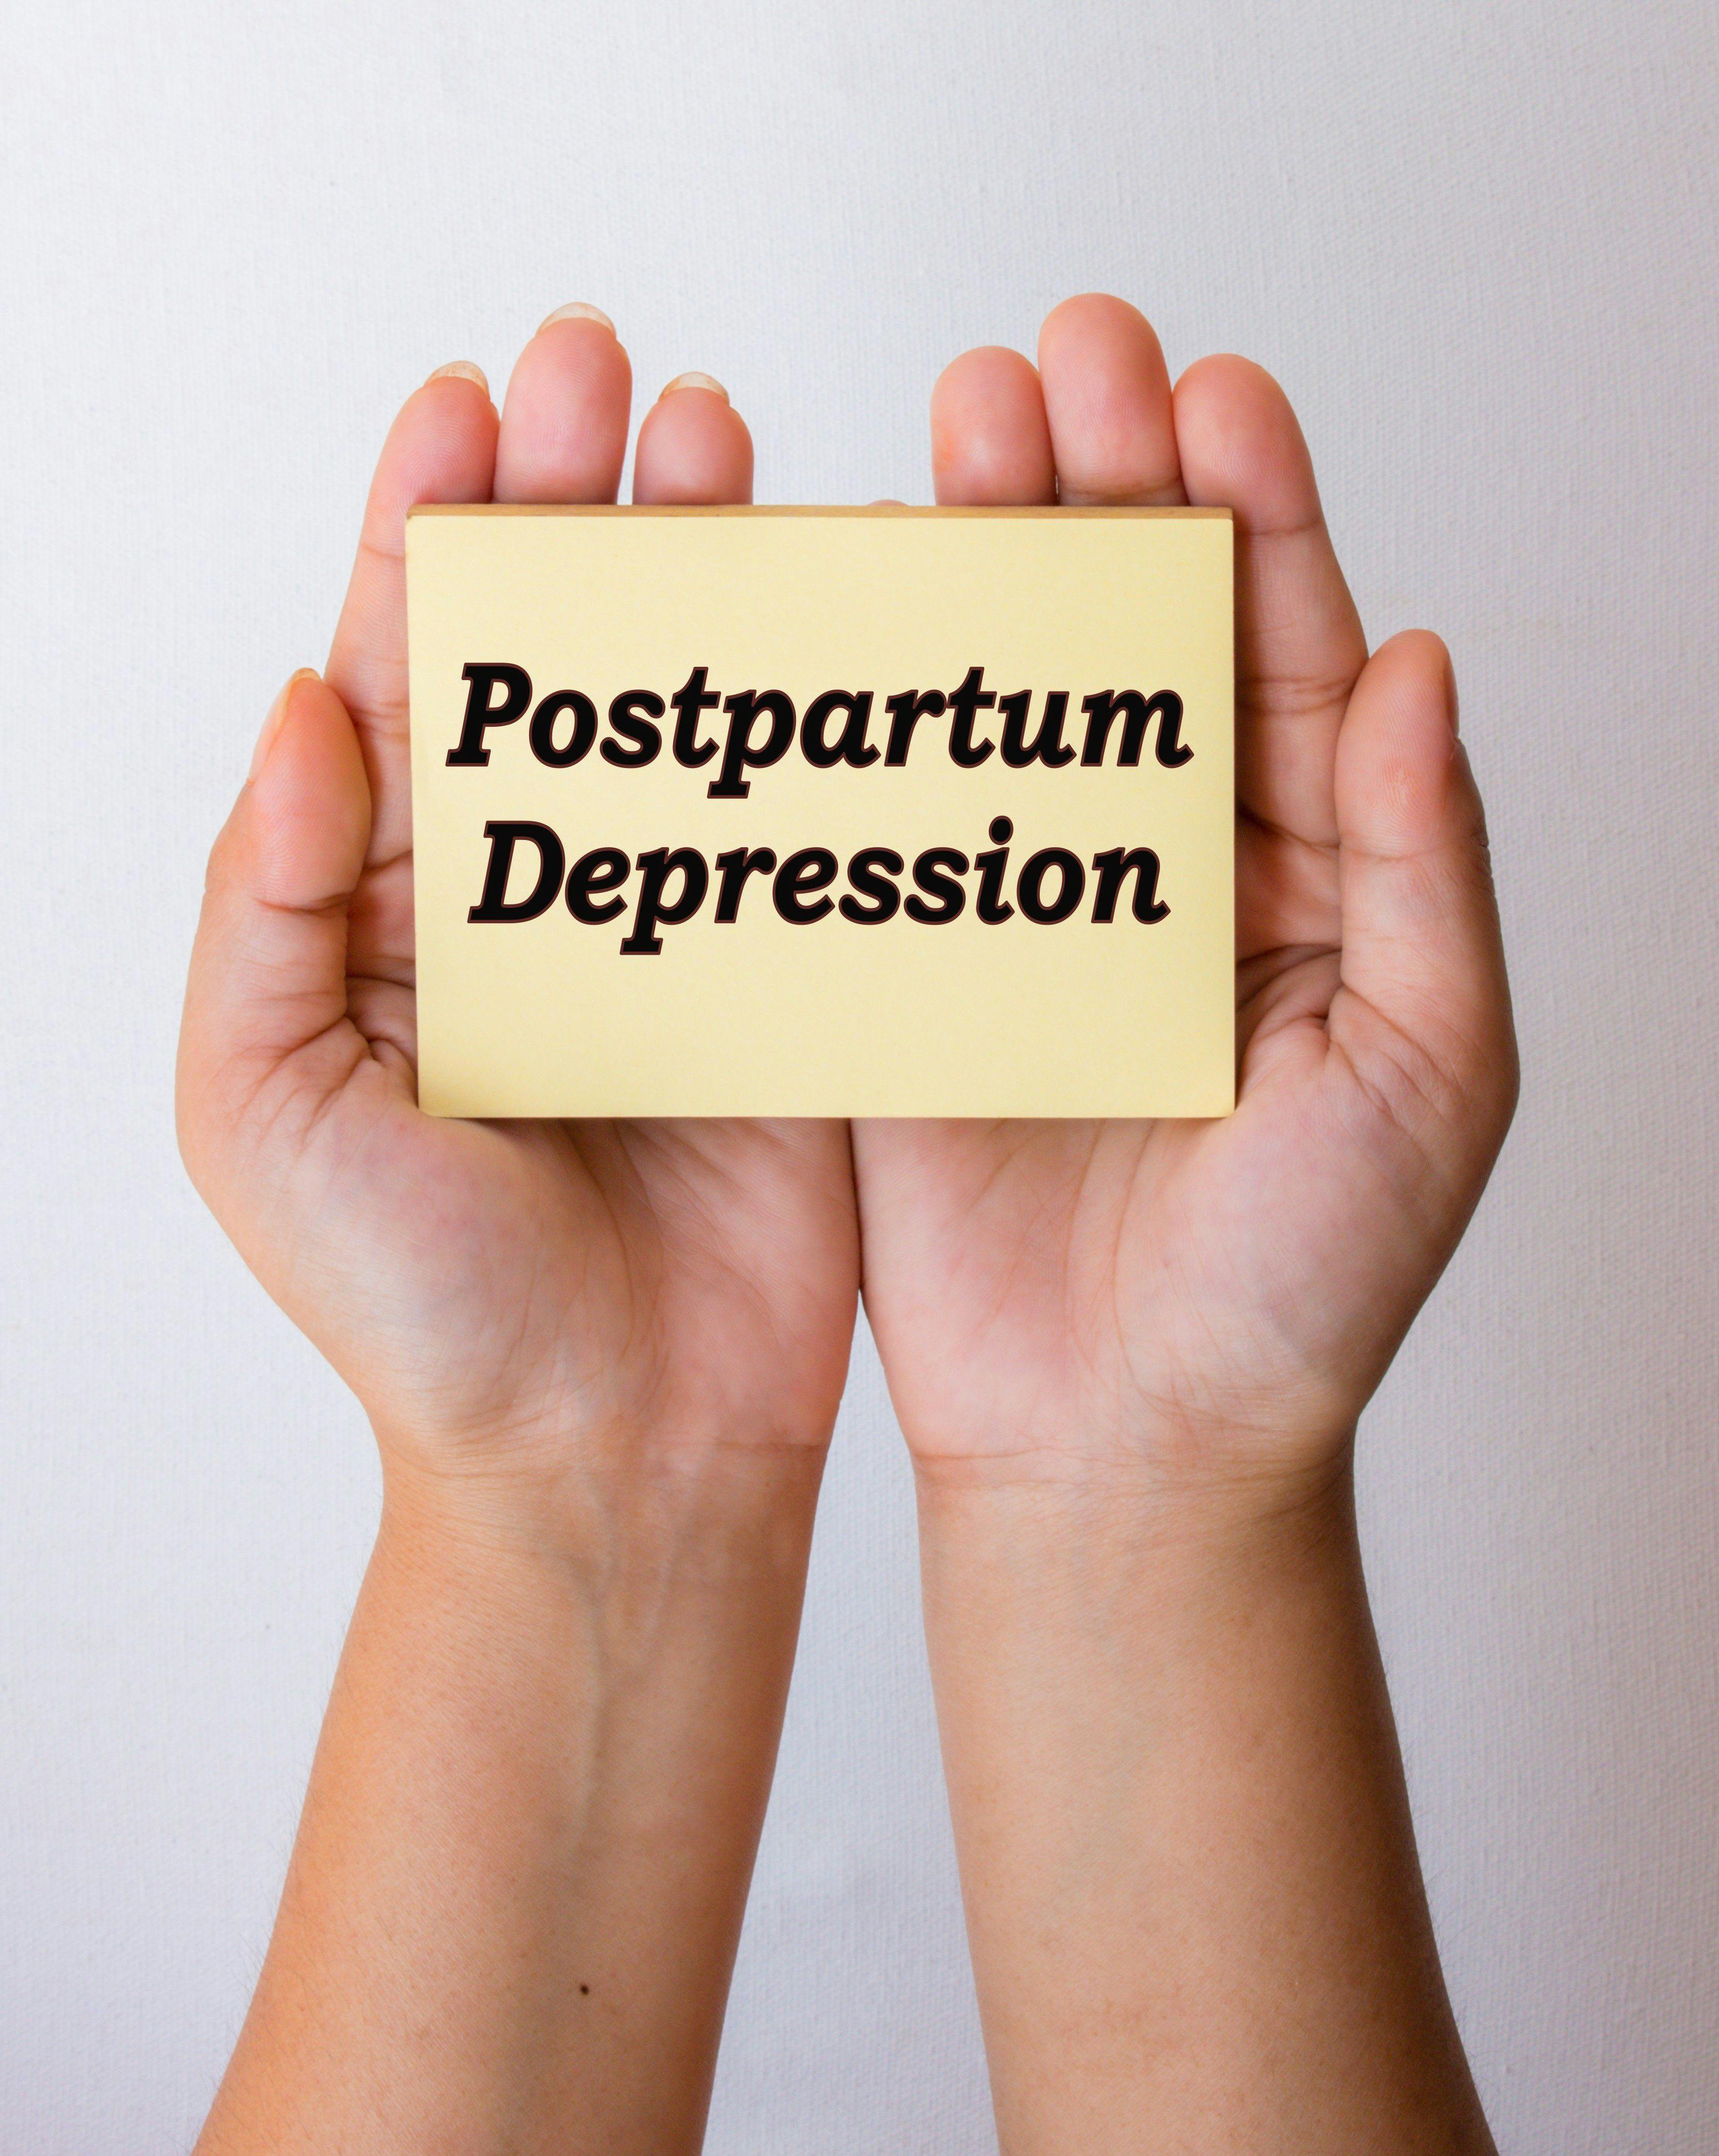 Postpartum Depression Therapy to Launch with $15,900 Price